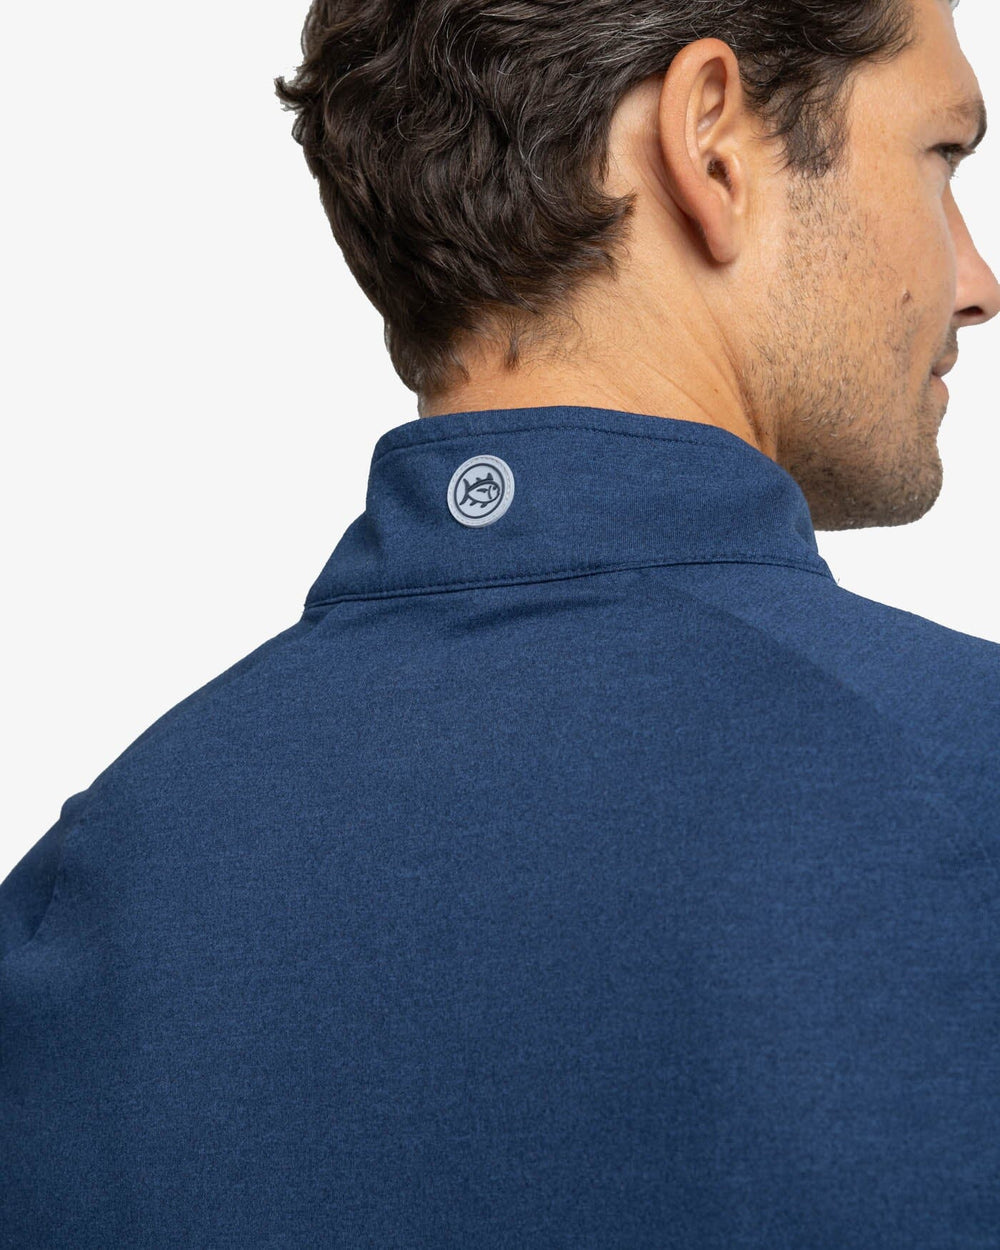 The yoke view of the Southern Tide Cruiser Heather Quarter Zip Pullover by Southern Tide - Heather Dress Blue